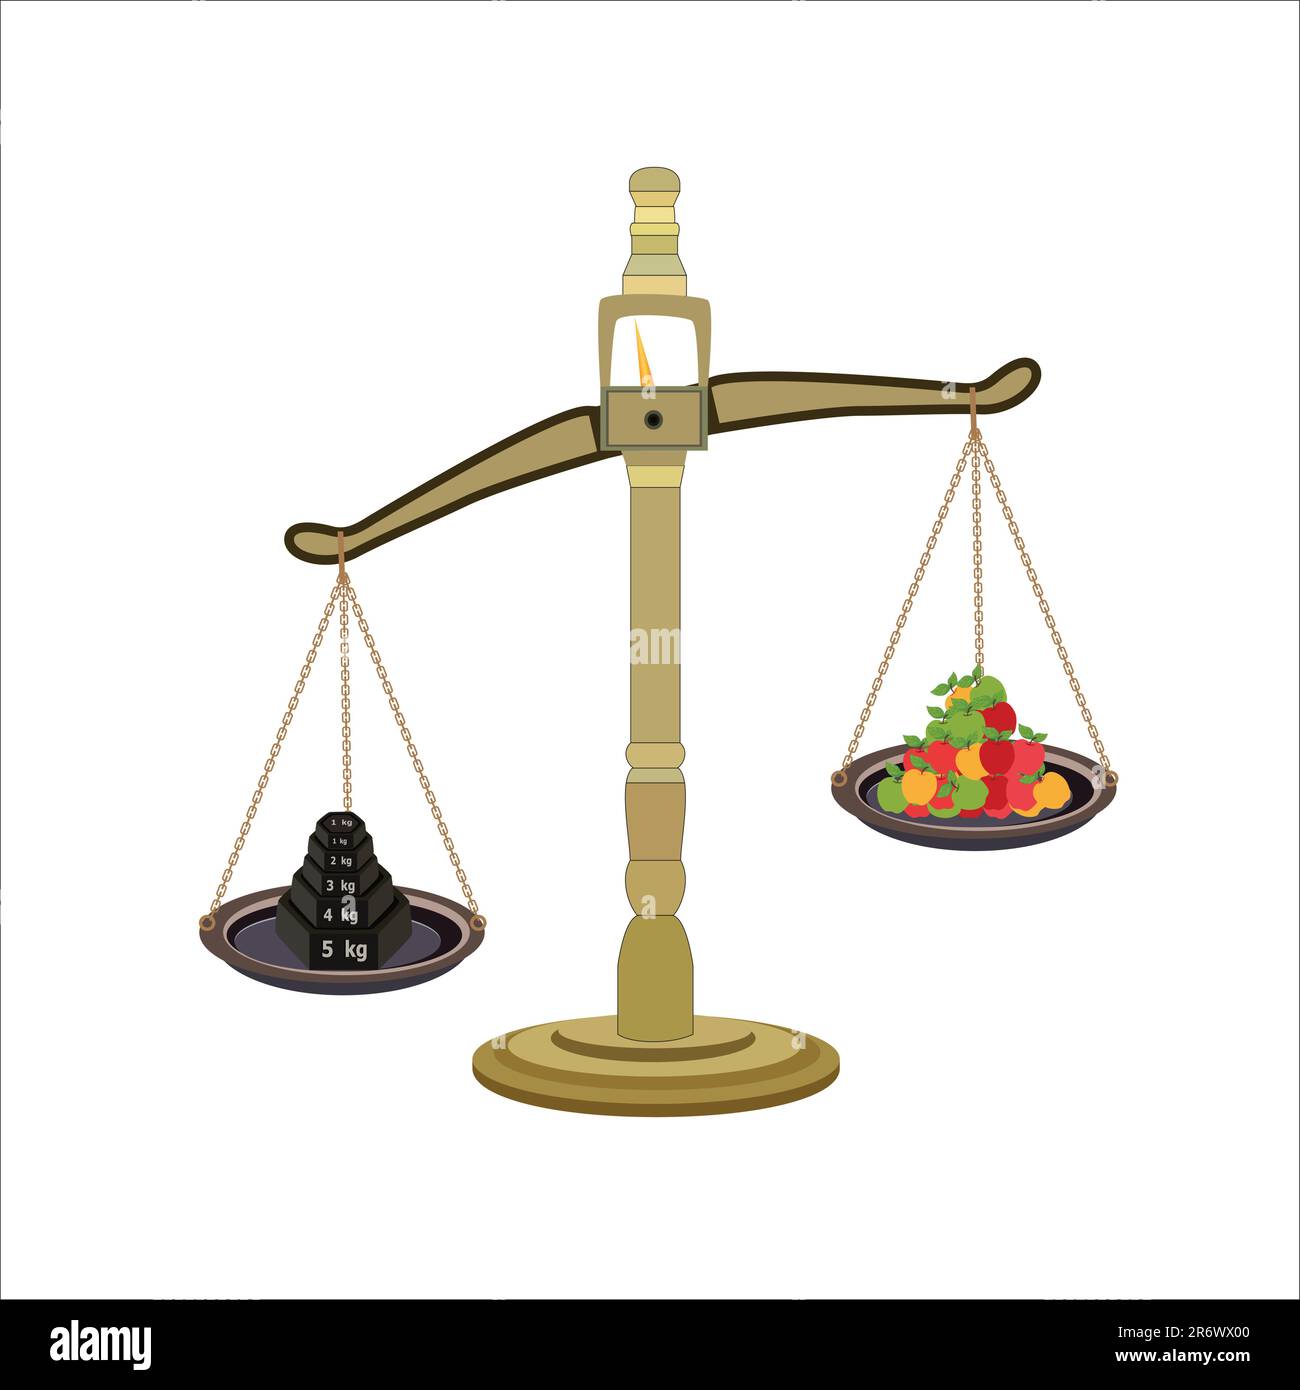 https://c8.alamy.com/comp/2R6WX00/weight-balance-scale-1kg-2kg-3kg-4kg-5kg-weight-stone-and-apples-equal-balance-measuring-vector-illustration-balance-measure-symbol-icon-2R6WX00.jpg